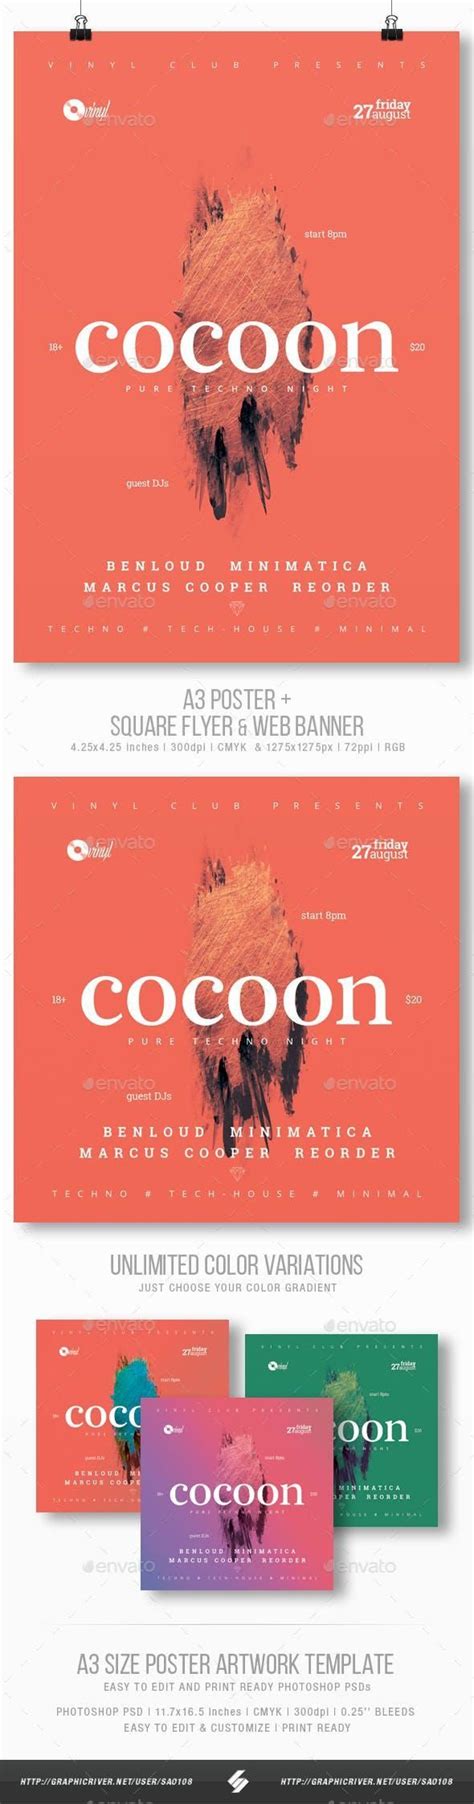 Cocoon Minimal Party Flyer Poster Template A3 Design Flyer